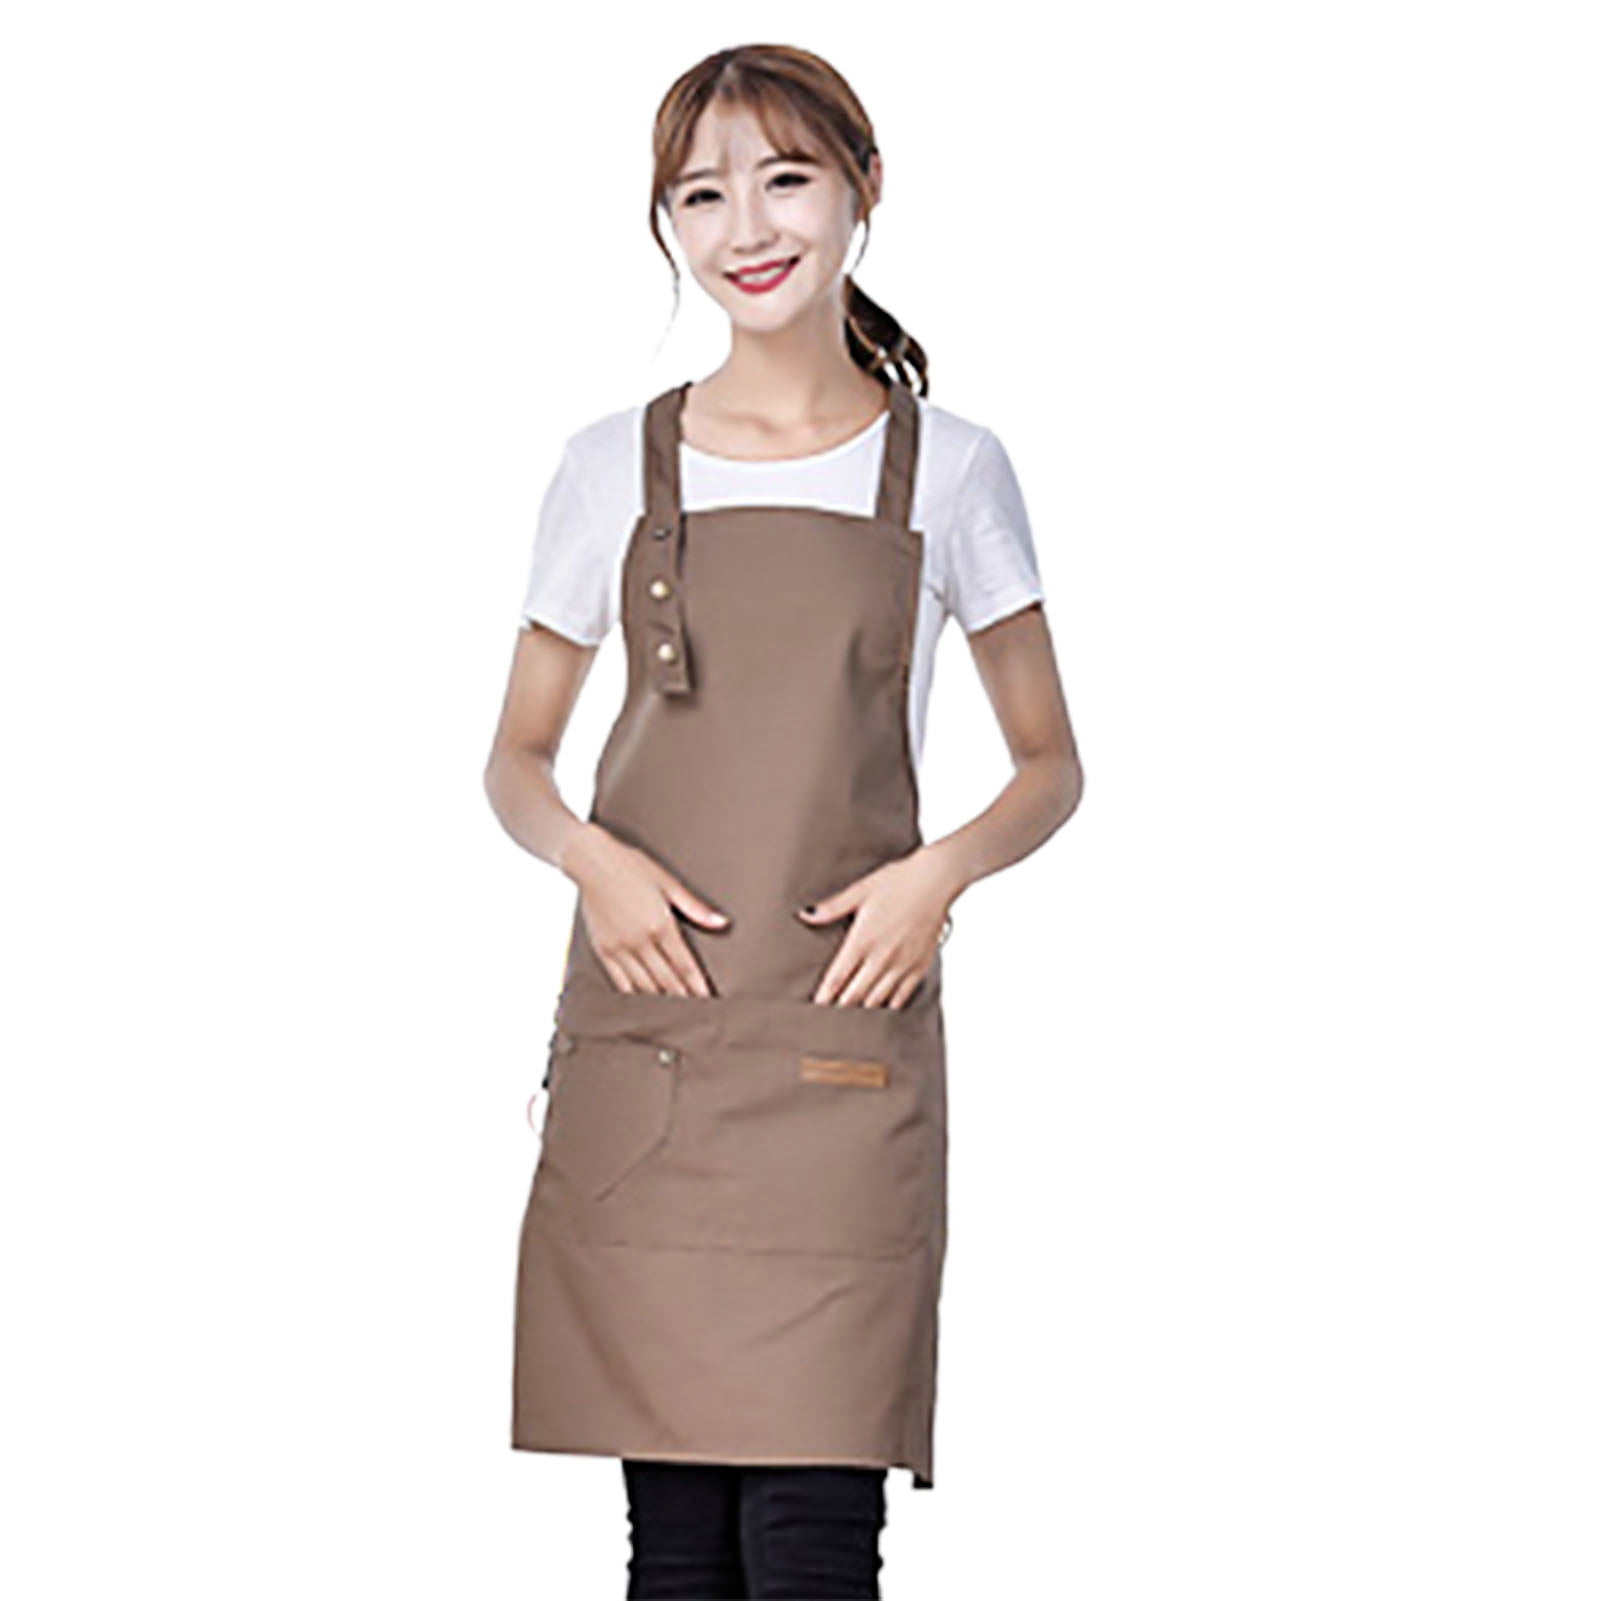 Details about   For Men,Women Waterproof Kitchen Apron Chef BBQ Cooking Baking-Apron With Pocket 